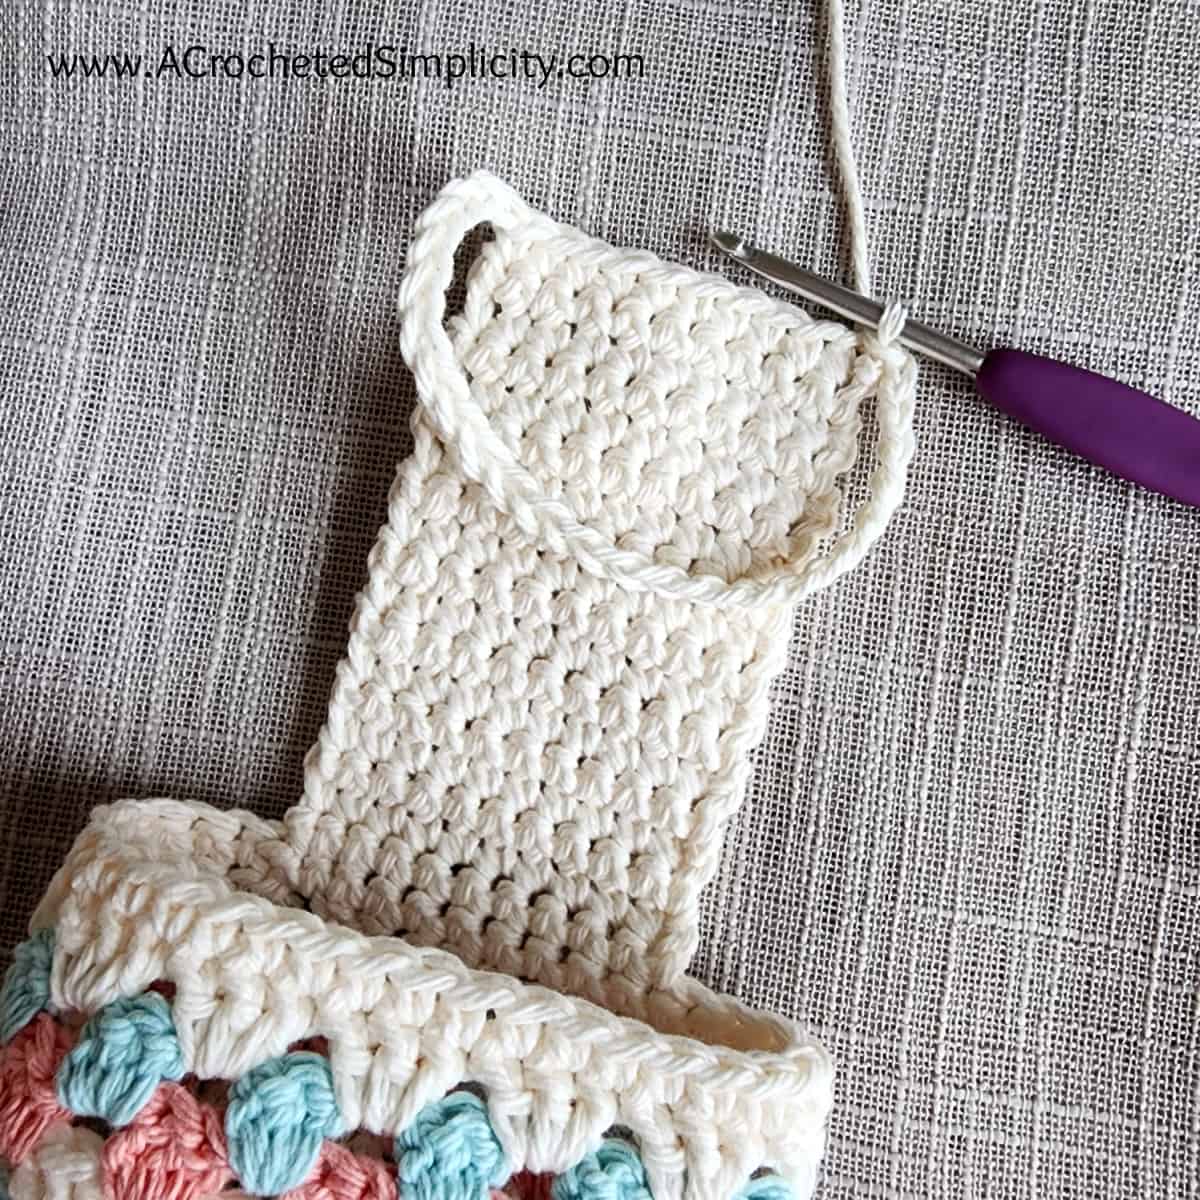 Join the crochet chain to the hanging strap on the chair caddy.